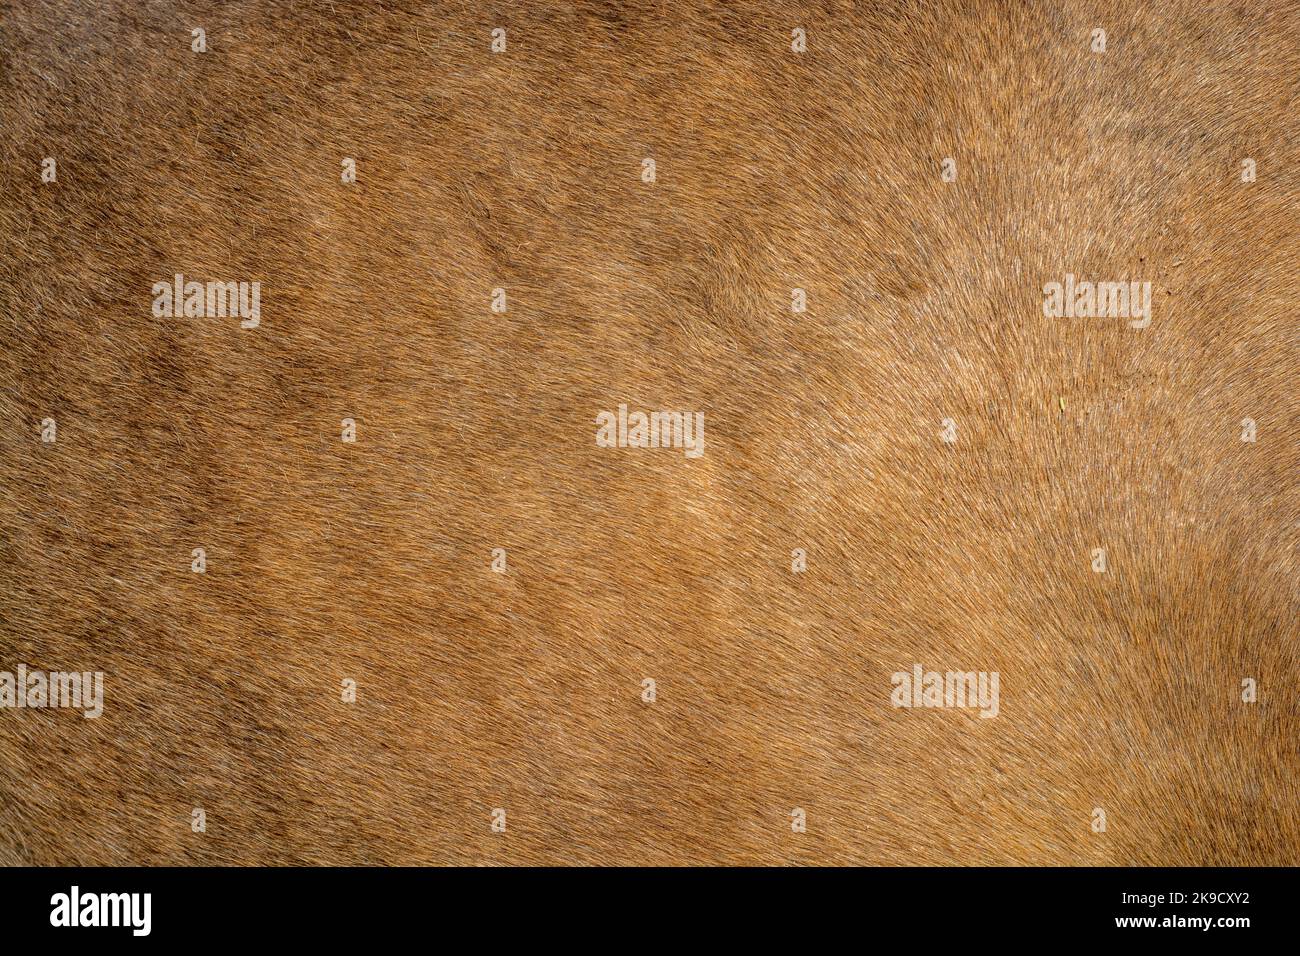 Brown fur texture background Stock Photo